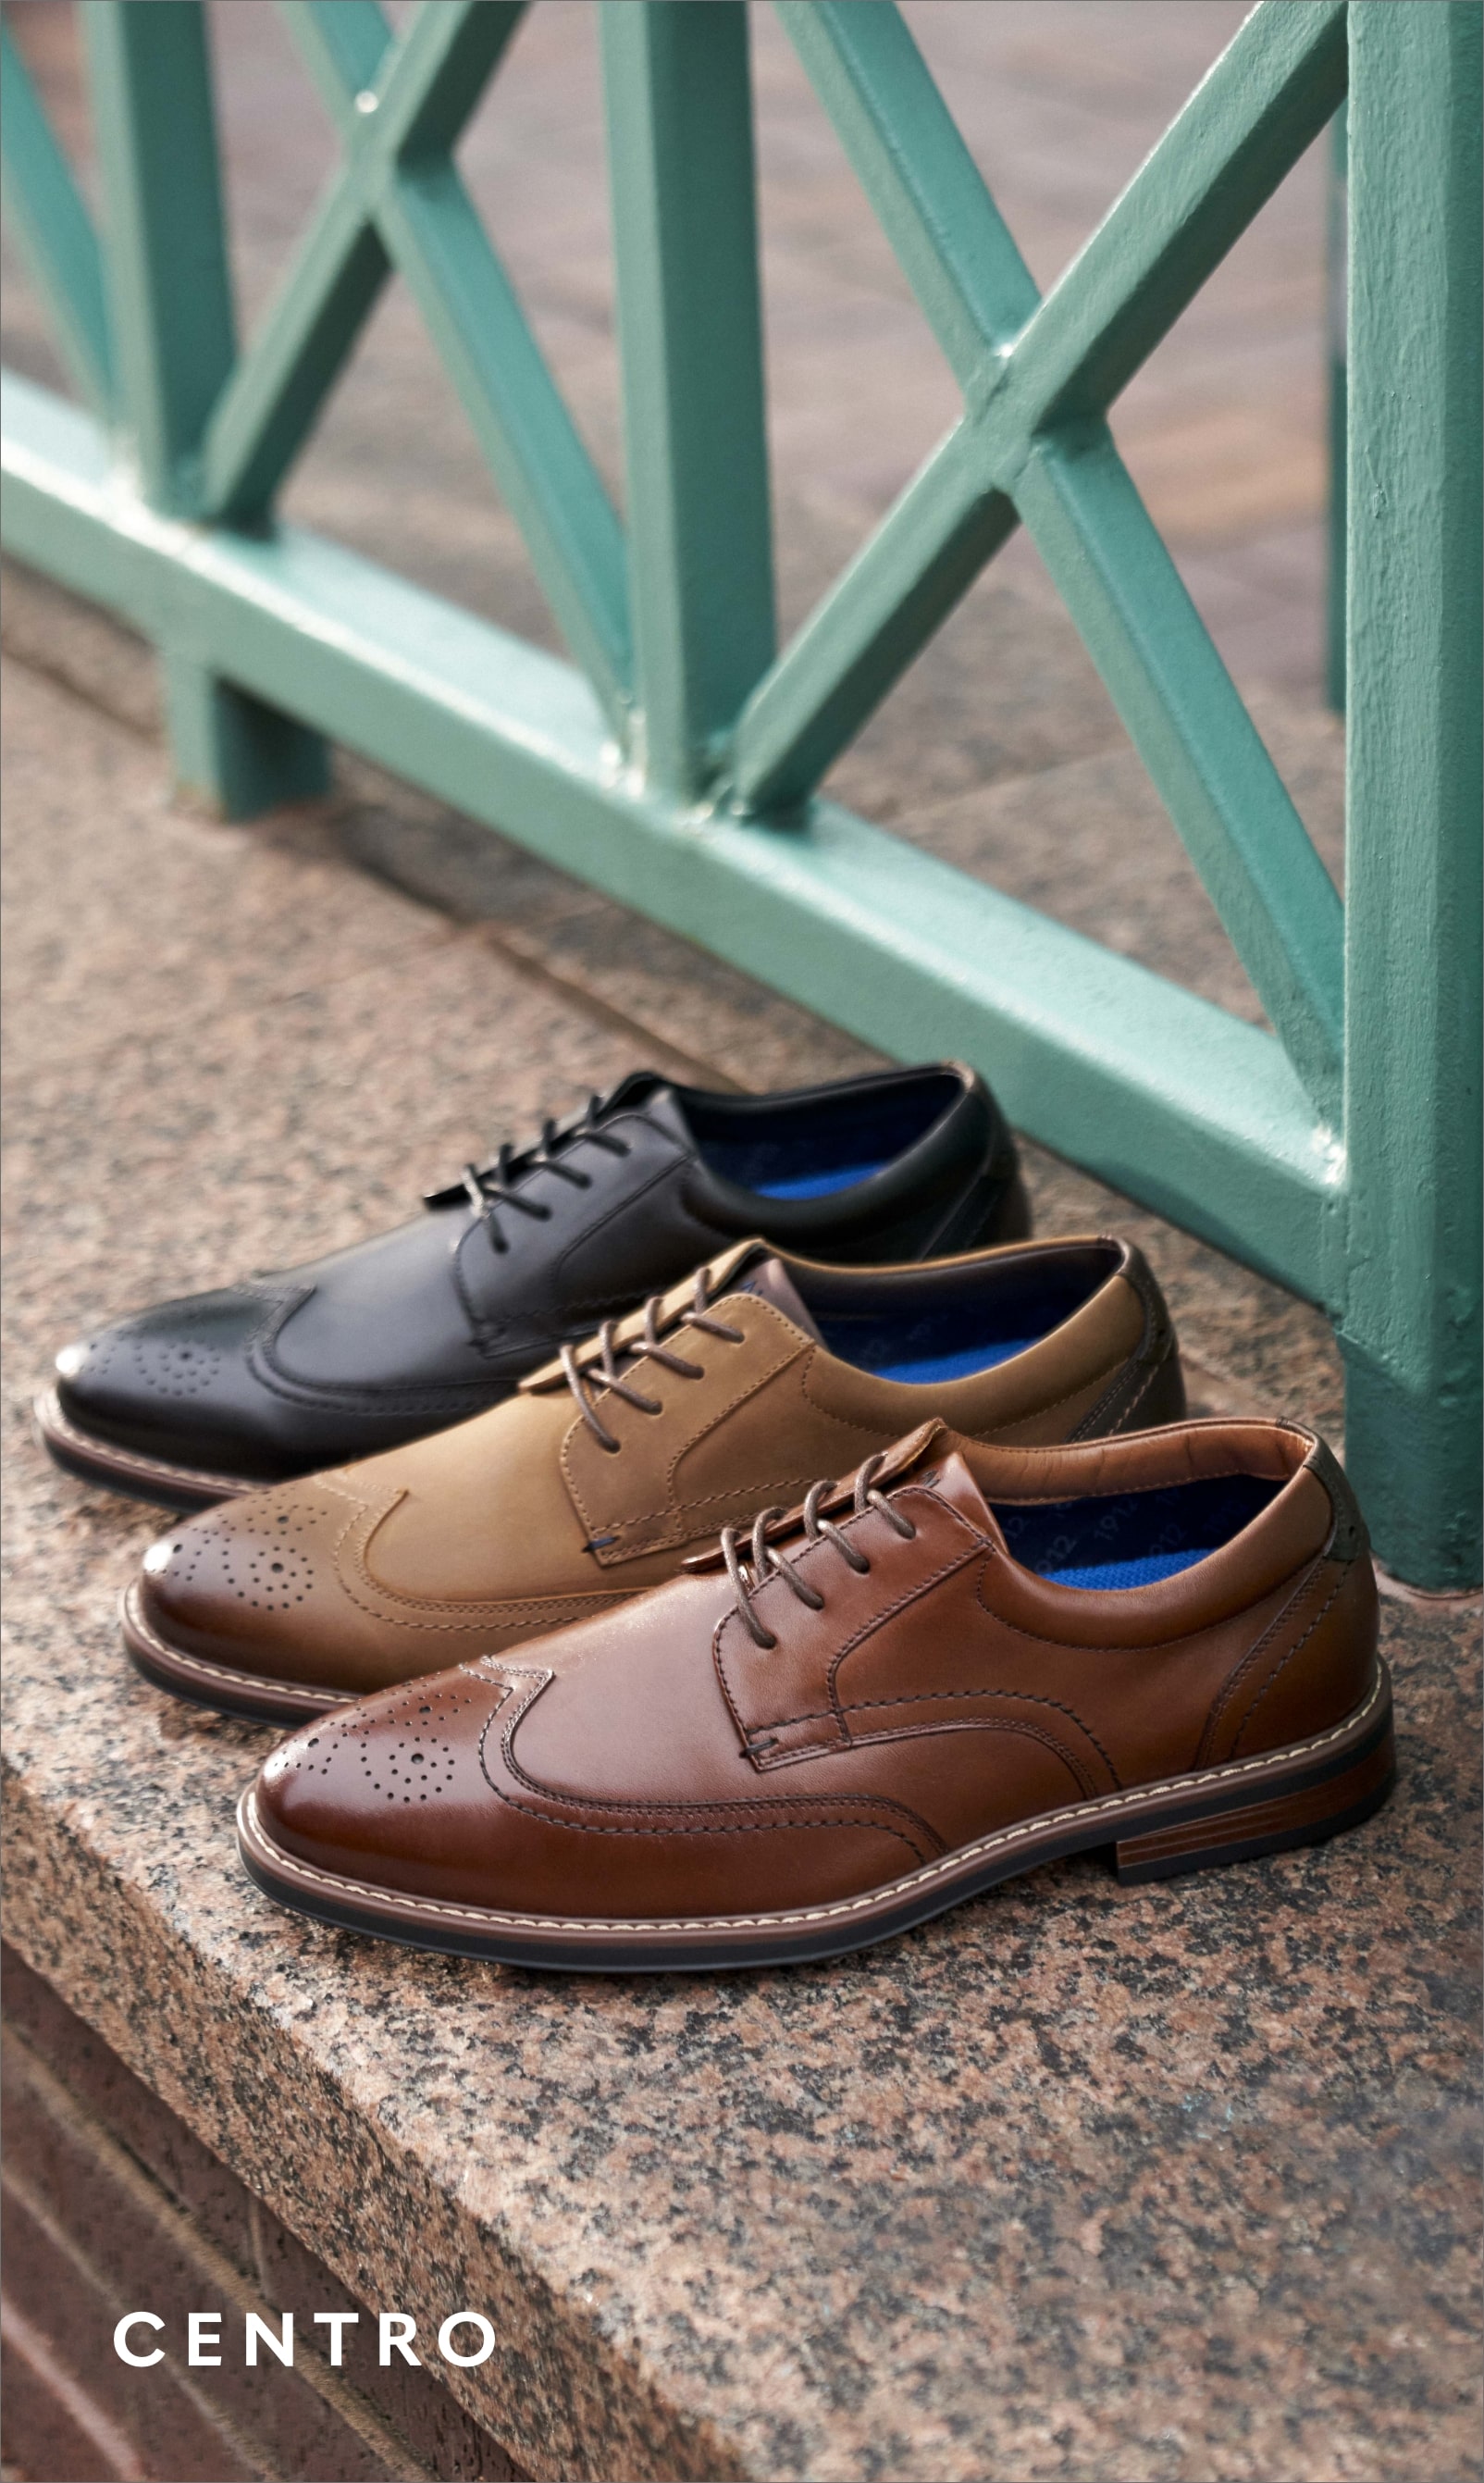 Men's Dress Shoes category. Image features the Centro Wingtip in all 3 colorways.